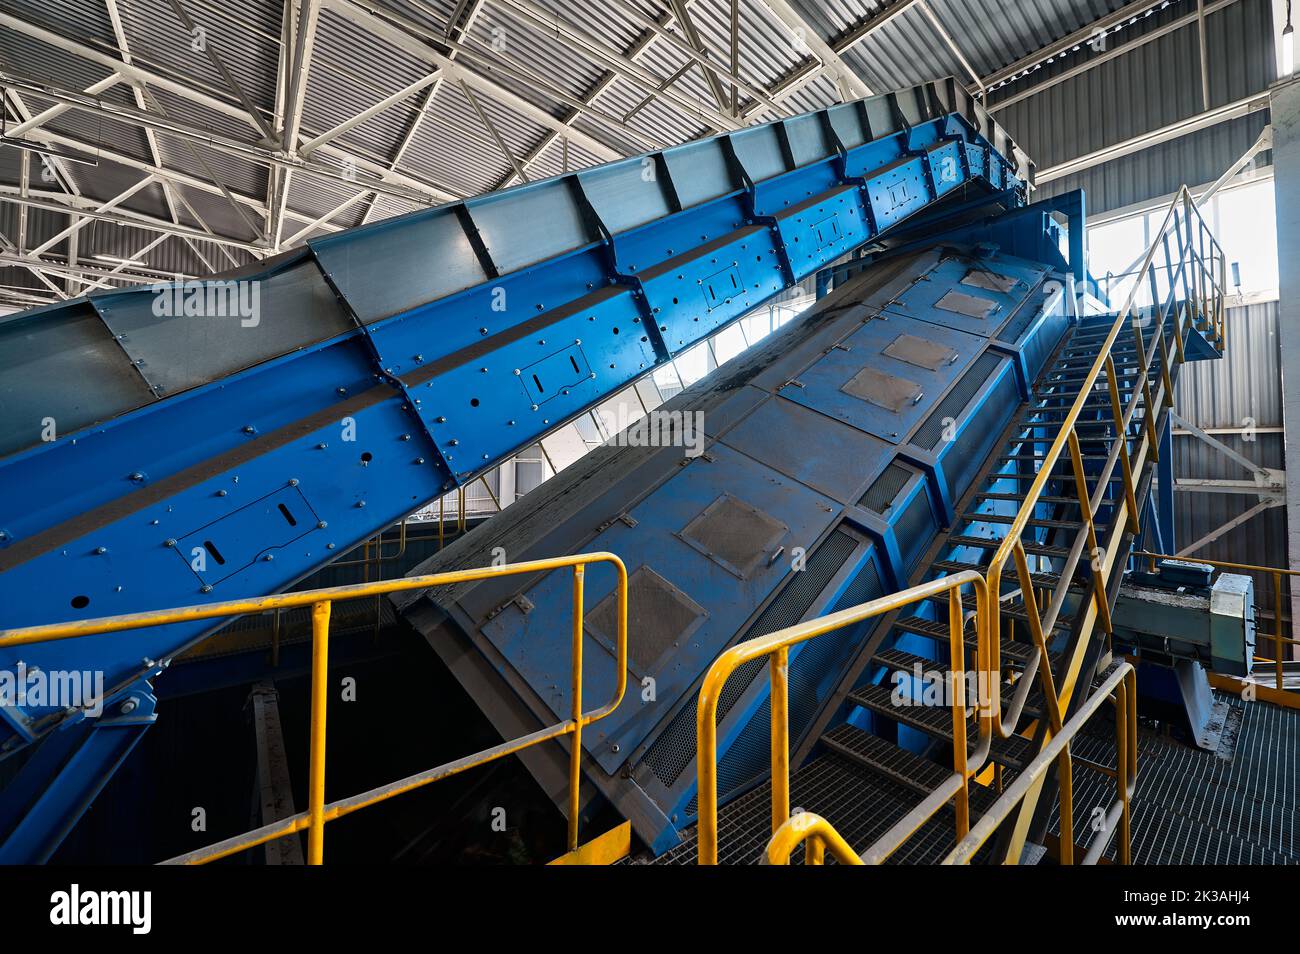 Large production line with conveyors carrying trash at plant Stock Photo